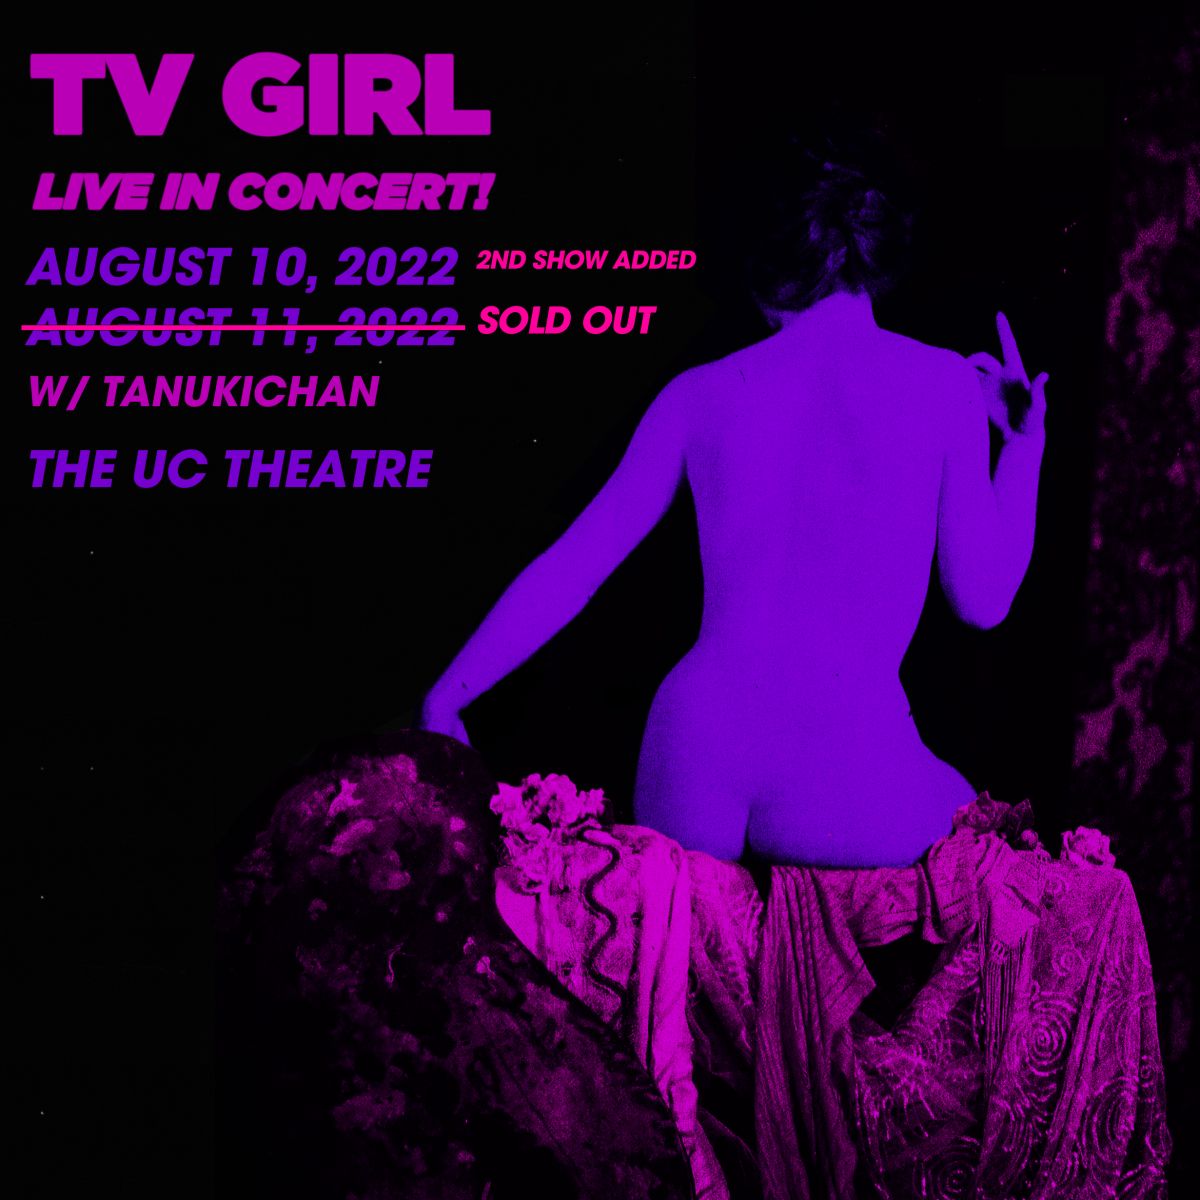 TV Girl - 2nd Show Added Image for TV Girl - 2nd Show Added on 2022-08-10